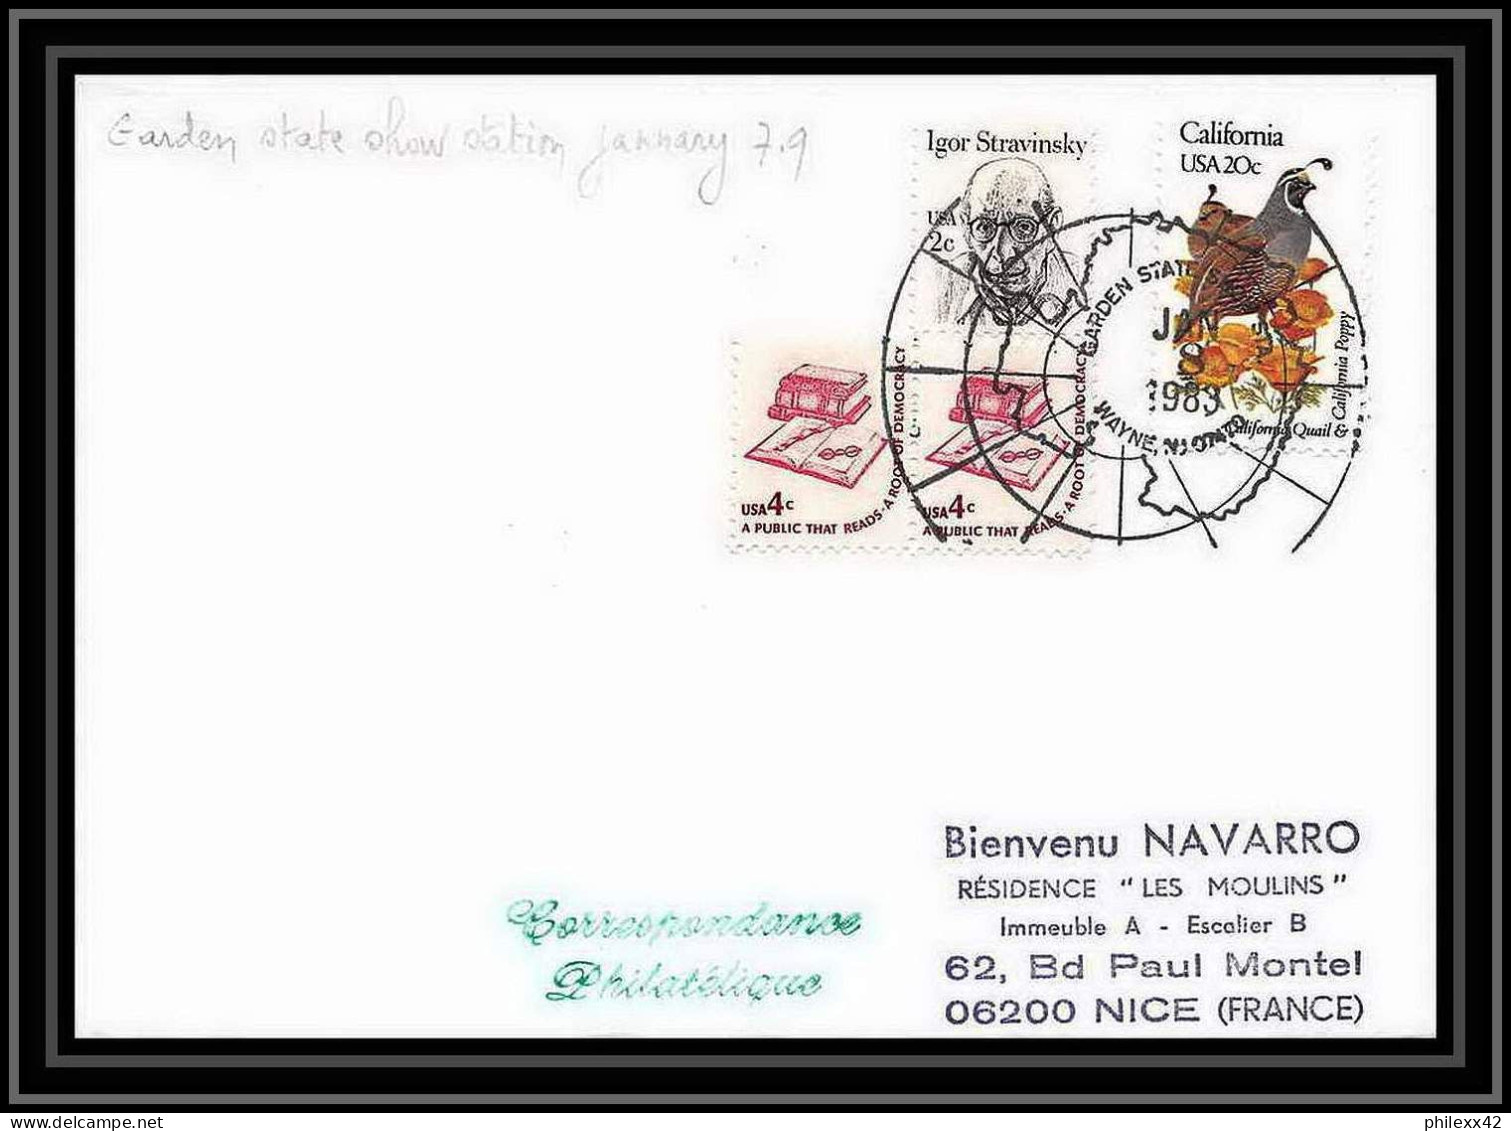 2000 Antarctic USA Lettre (cover) Garden State Show Station 8/1/1983 - Scientific Stations & Arctic Drifting Stations